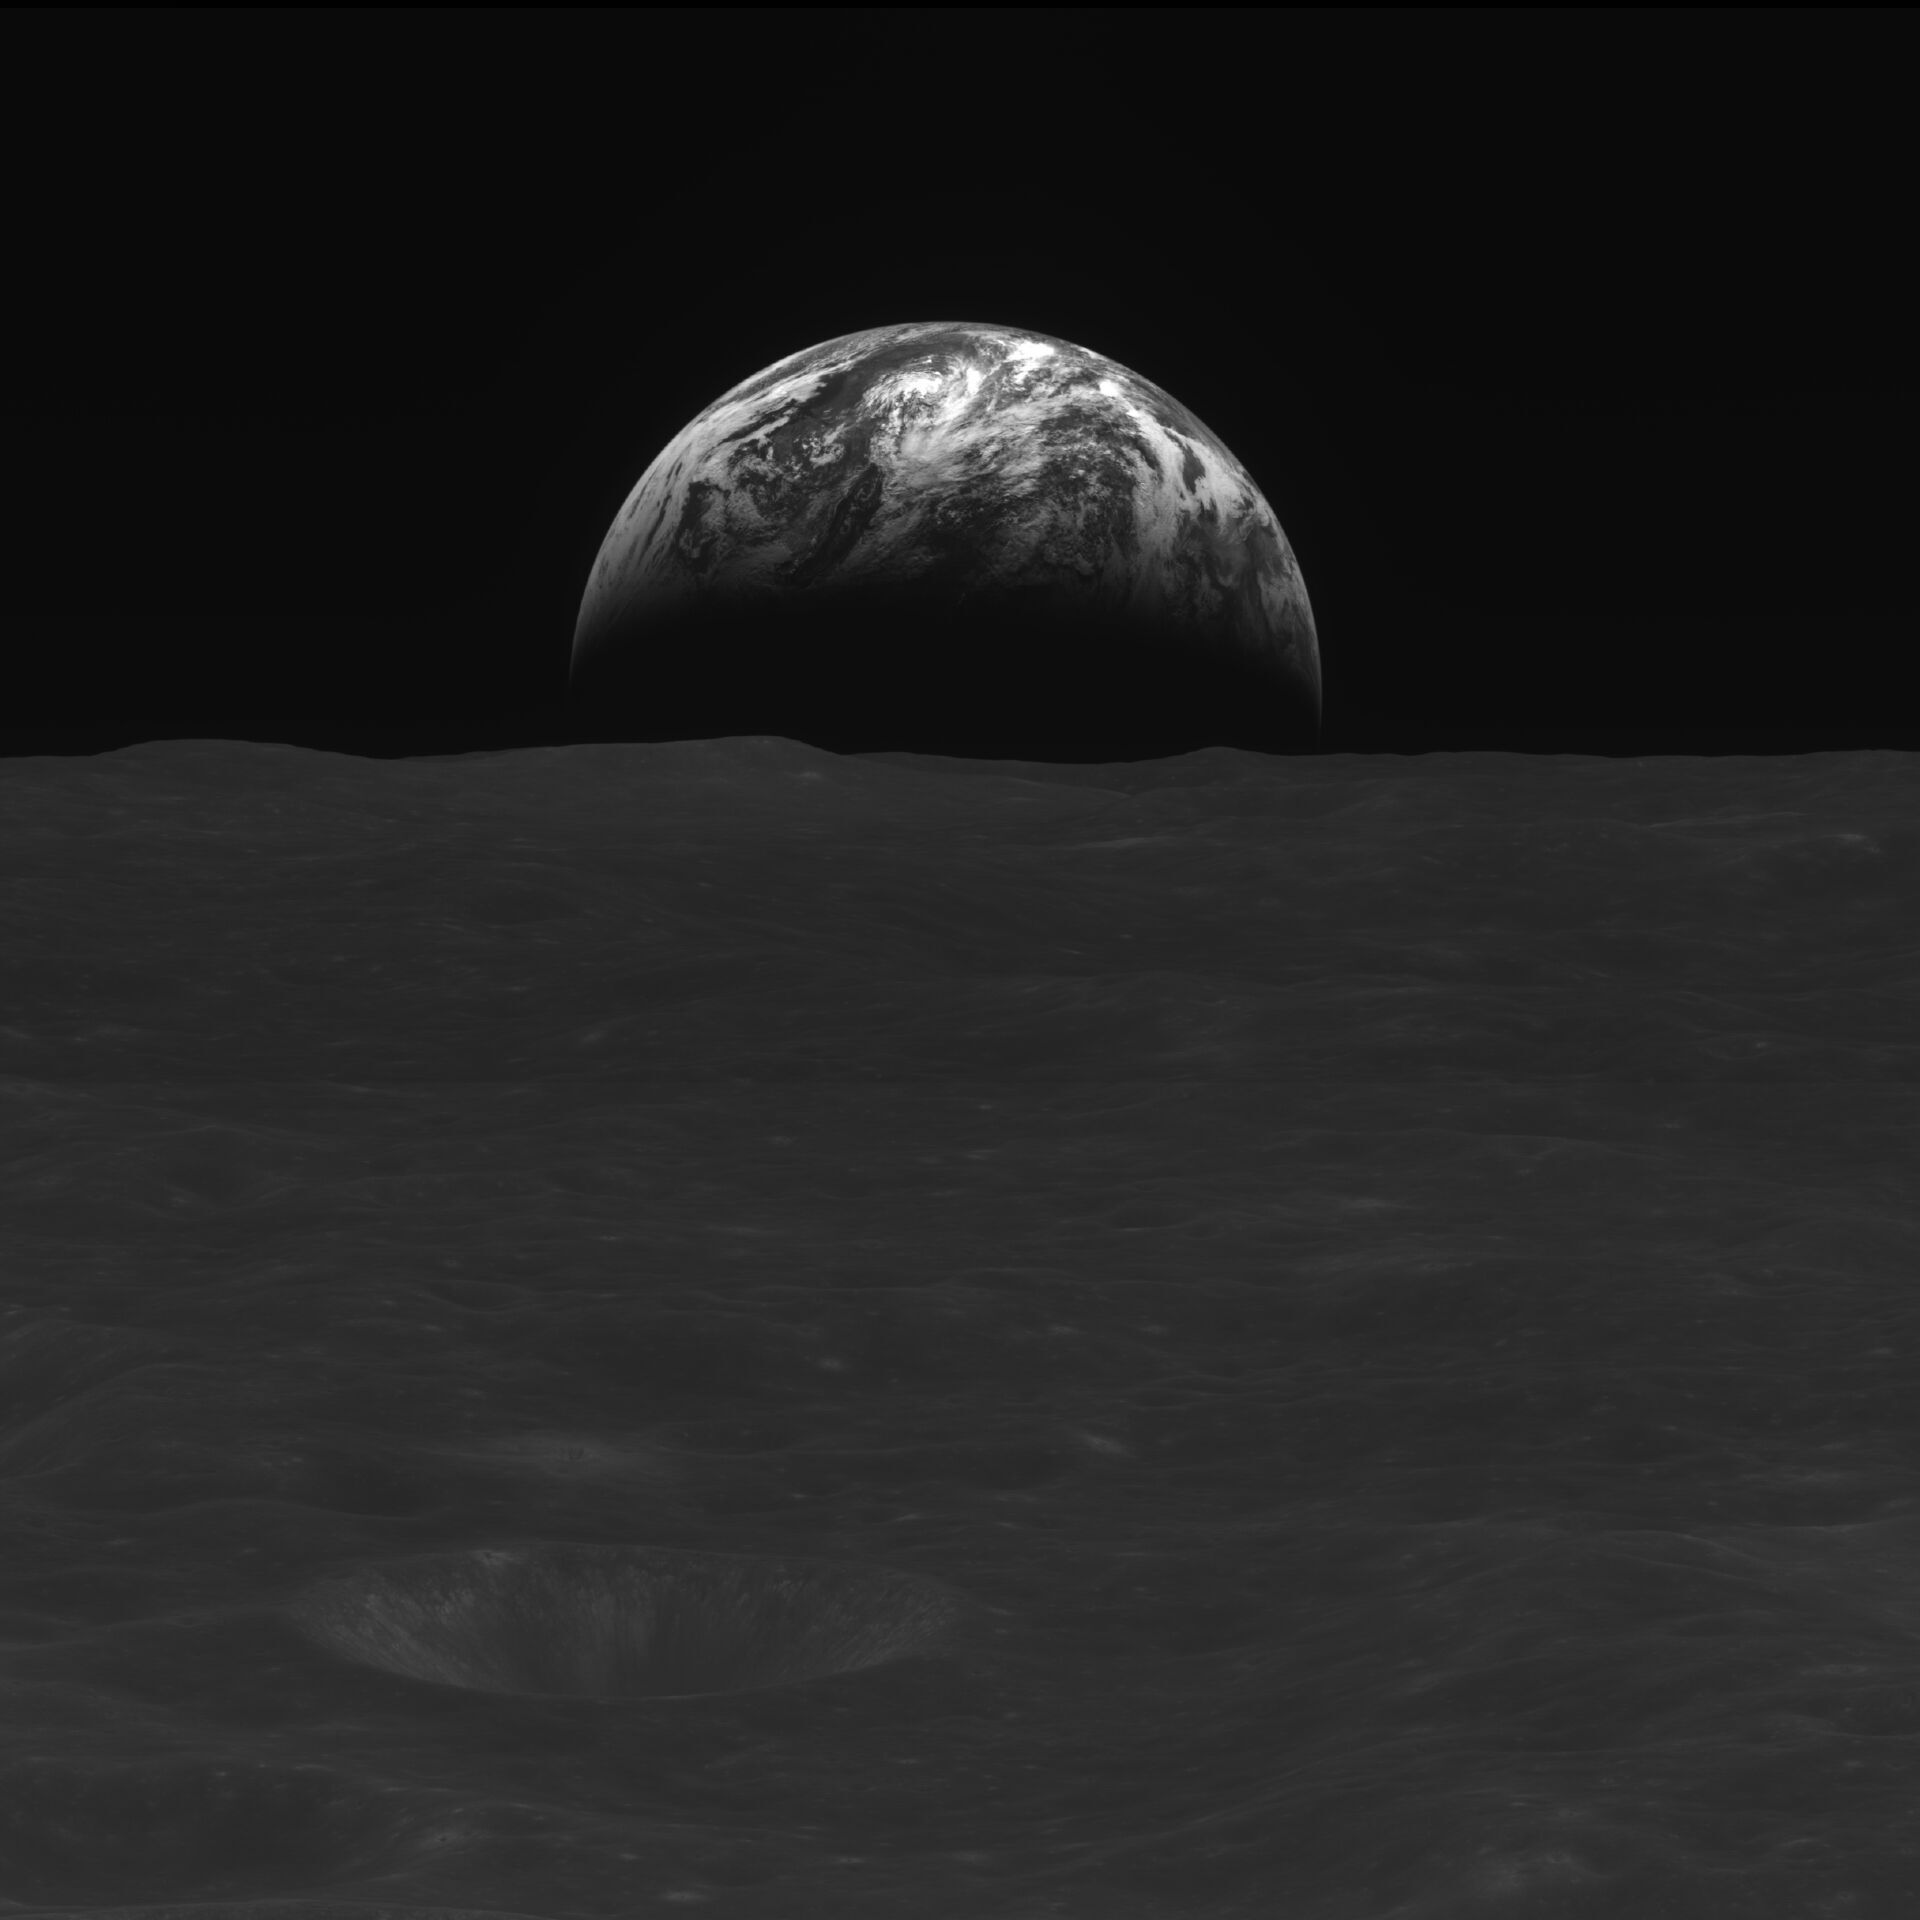 View of the Earth from the Moon's orbit on December 31, 2022.